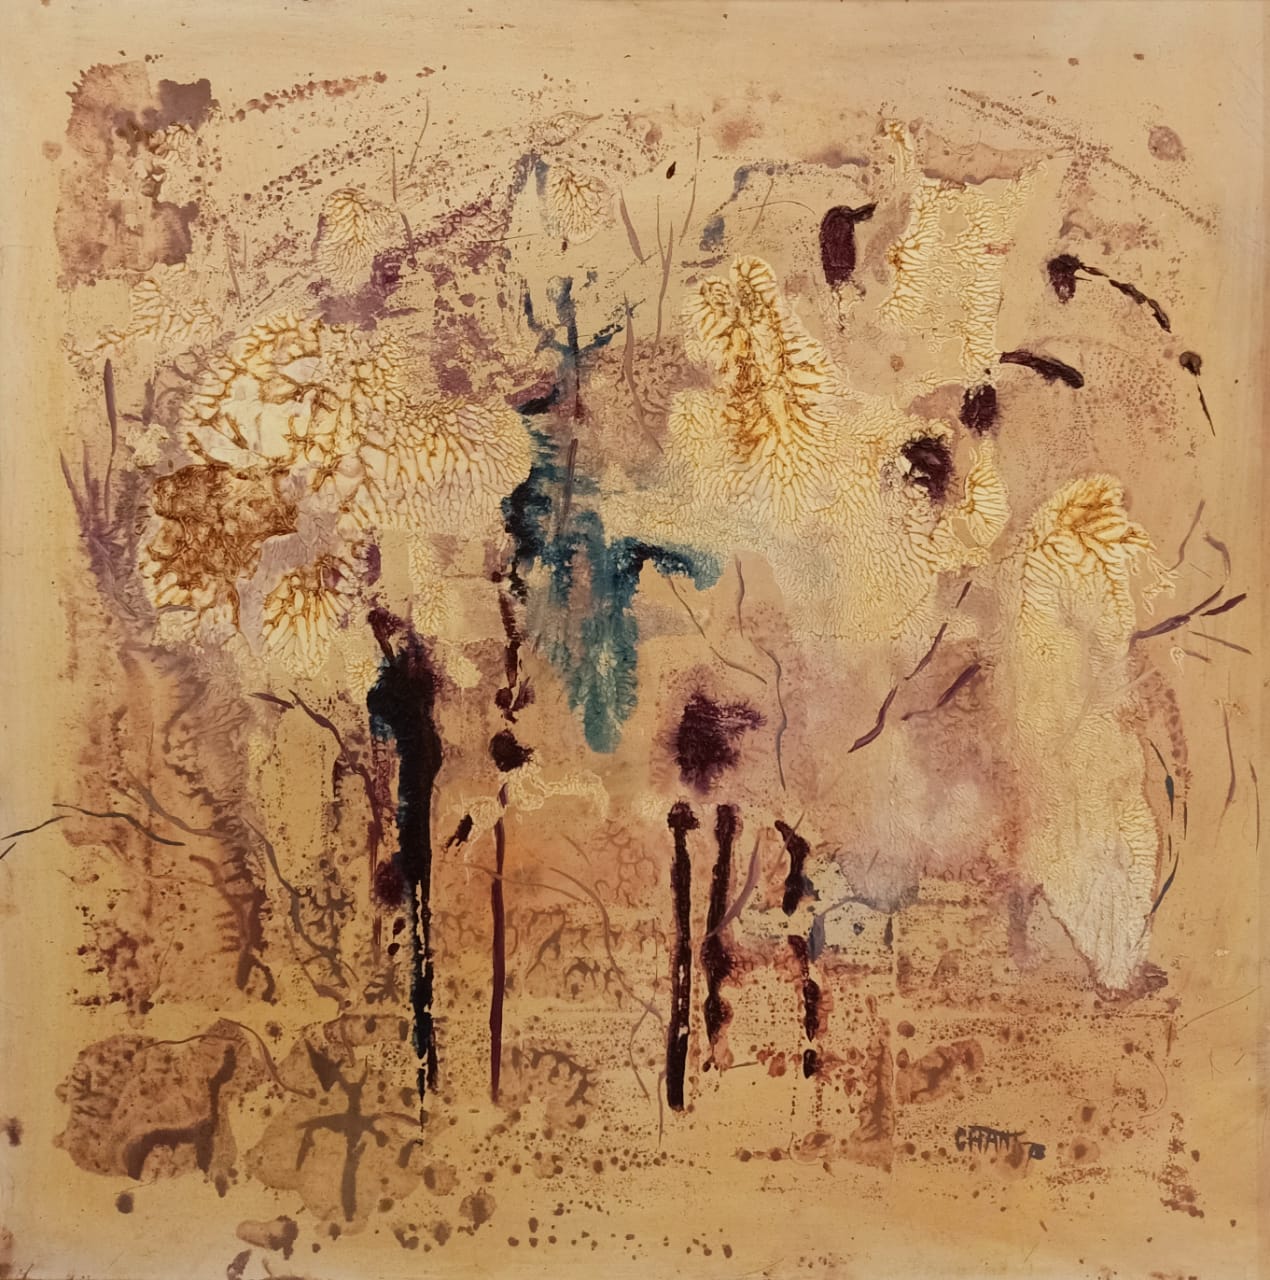 Chant Avedissian, Untitled, 1978. Oil on Canvas, Signed, 70 x 70 cm